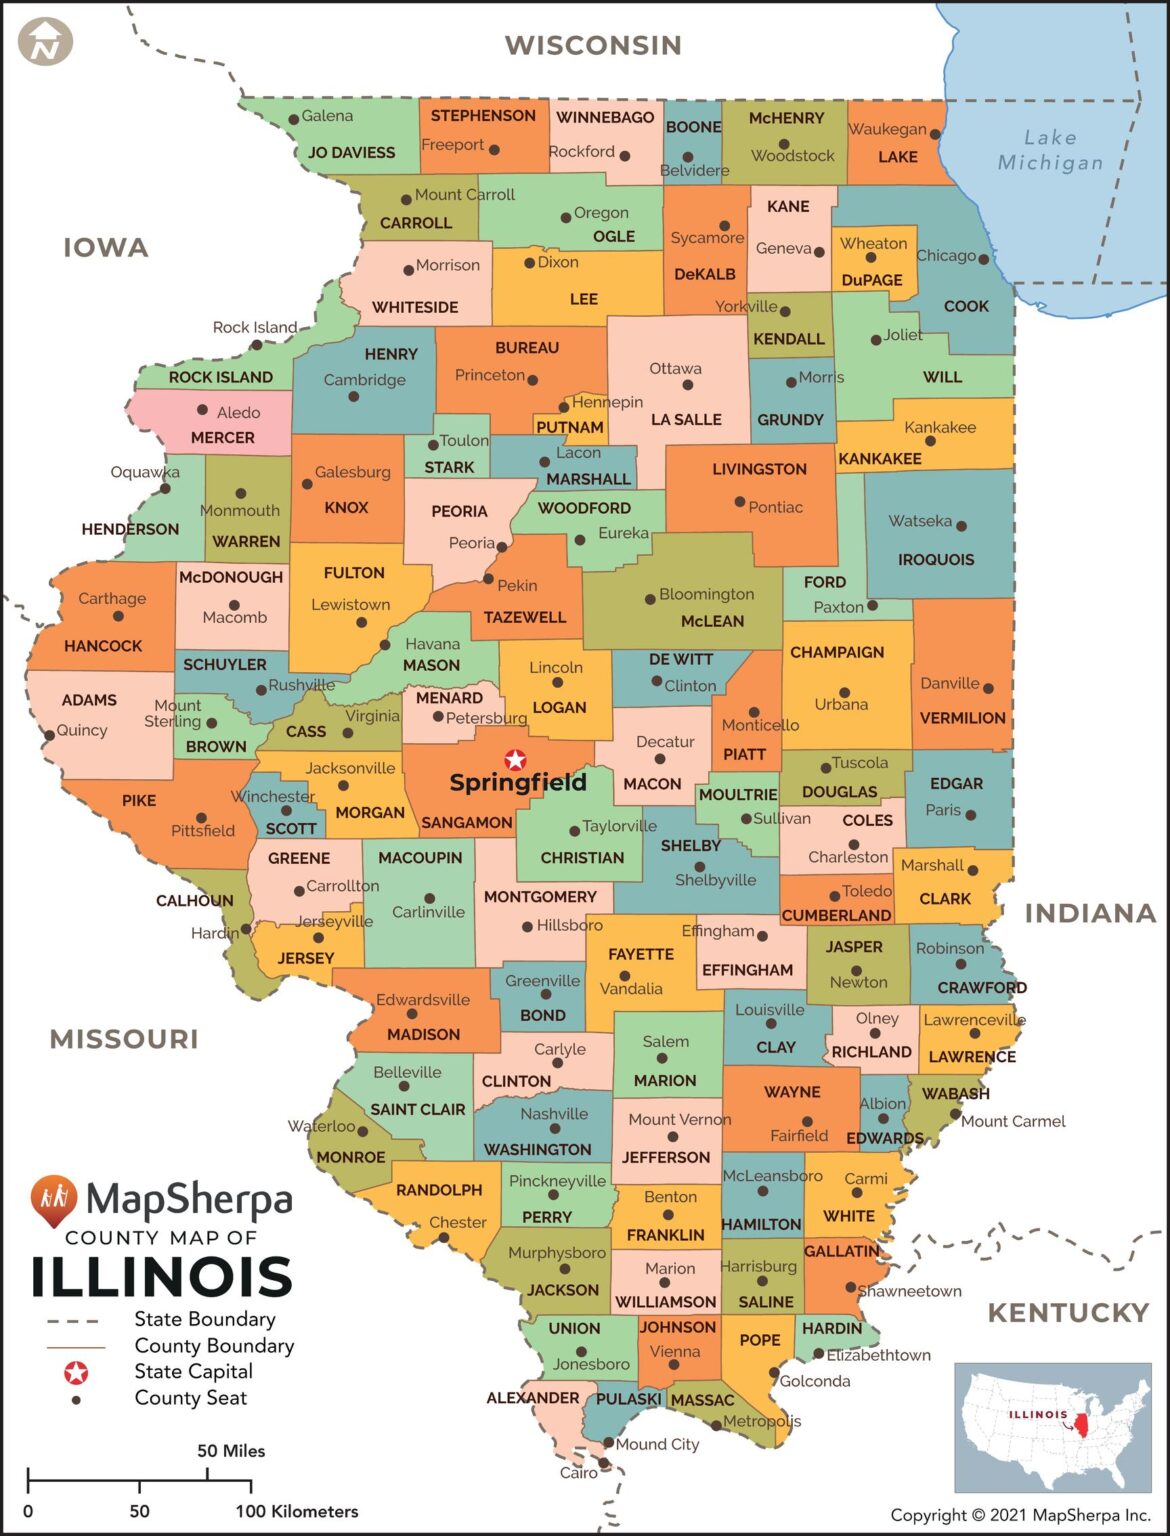 Illinois Counties Map By Mapsherpa The Map Shop 0706